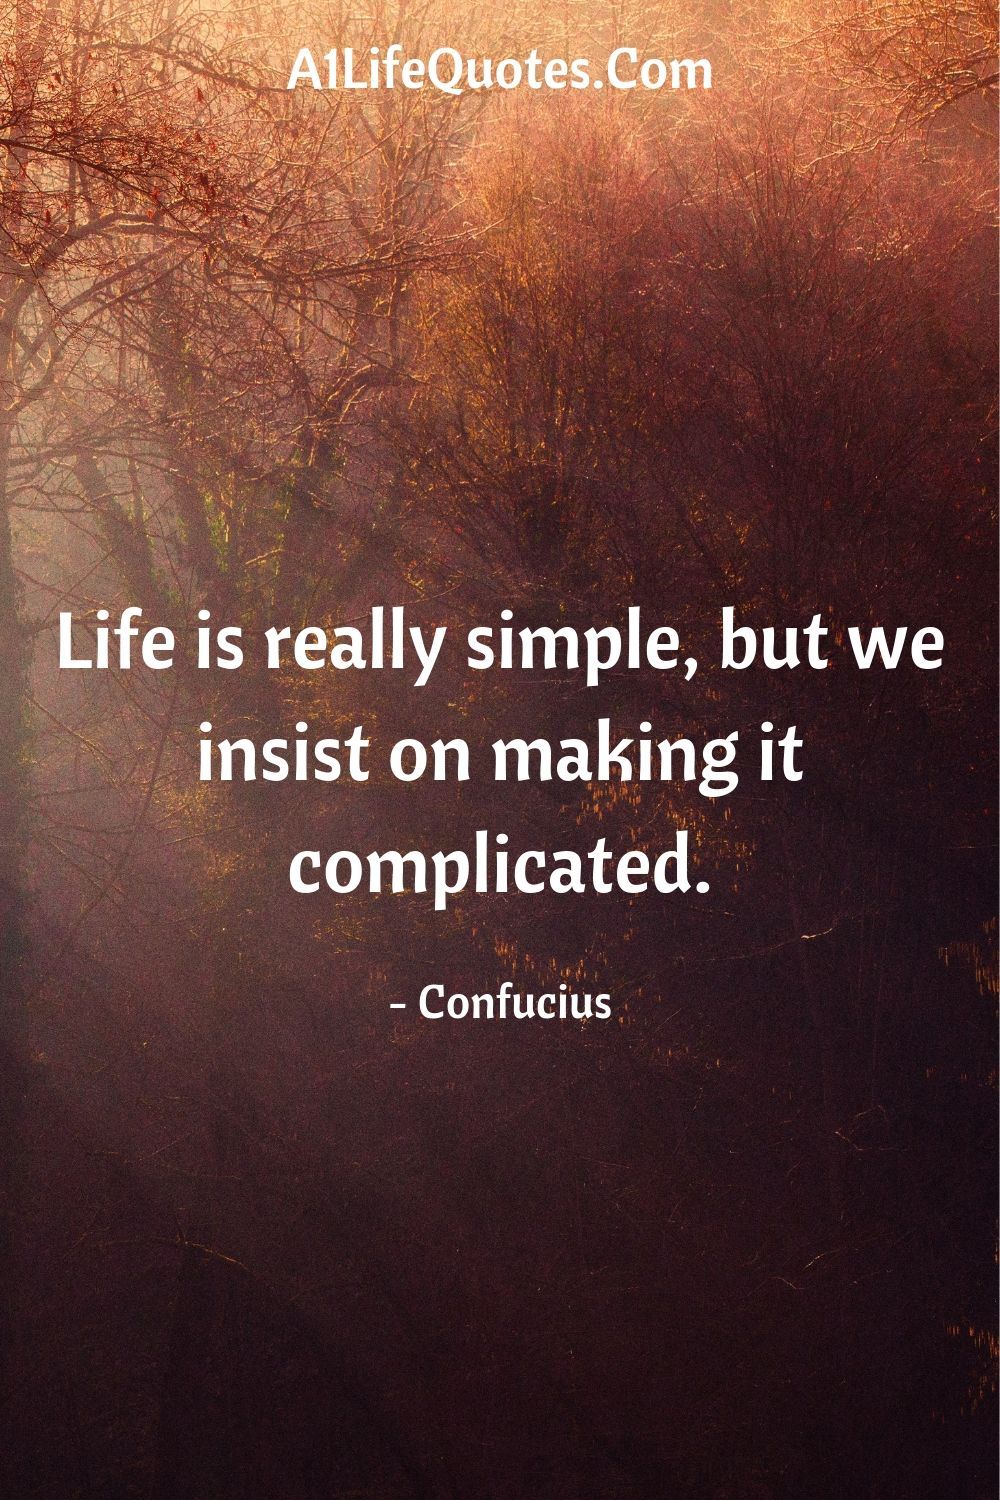 Simple Life Quotes In English - KibrisPDR